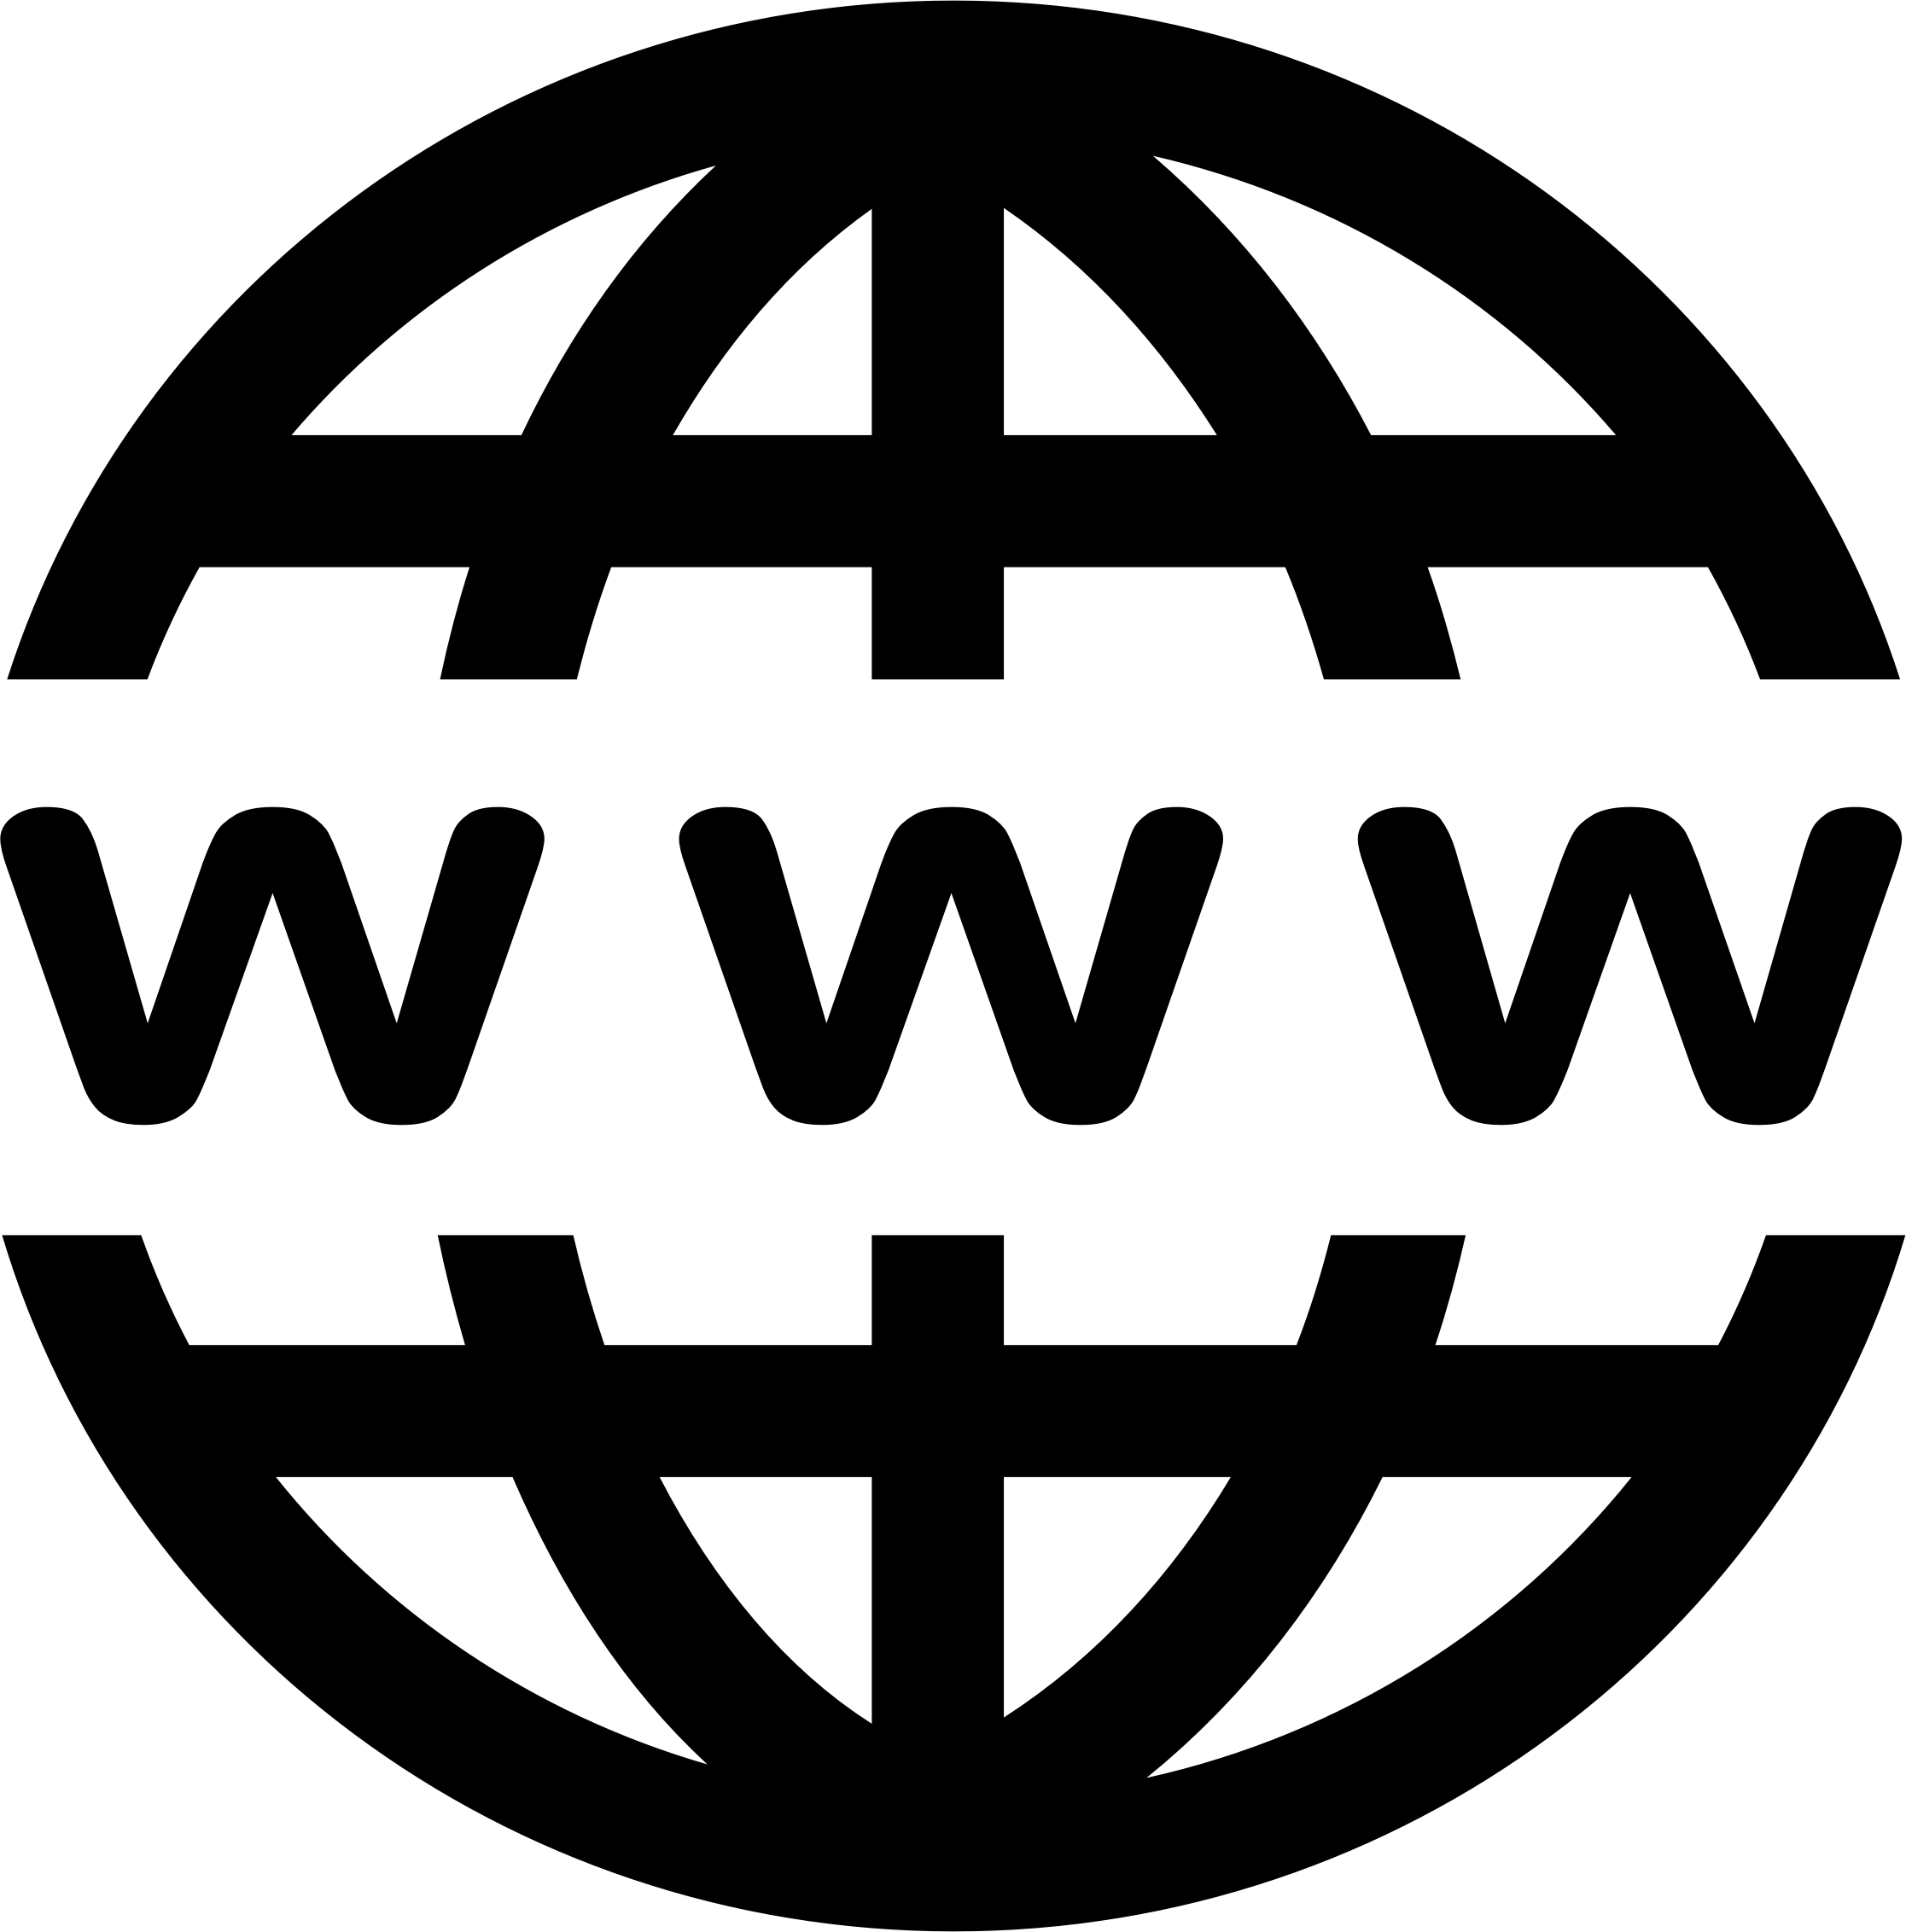 World Wide Web Logo - World Wide Web | The Internet | Know Your Meme